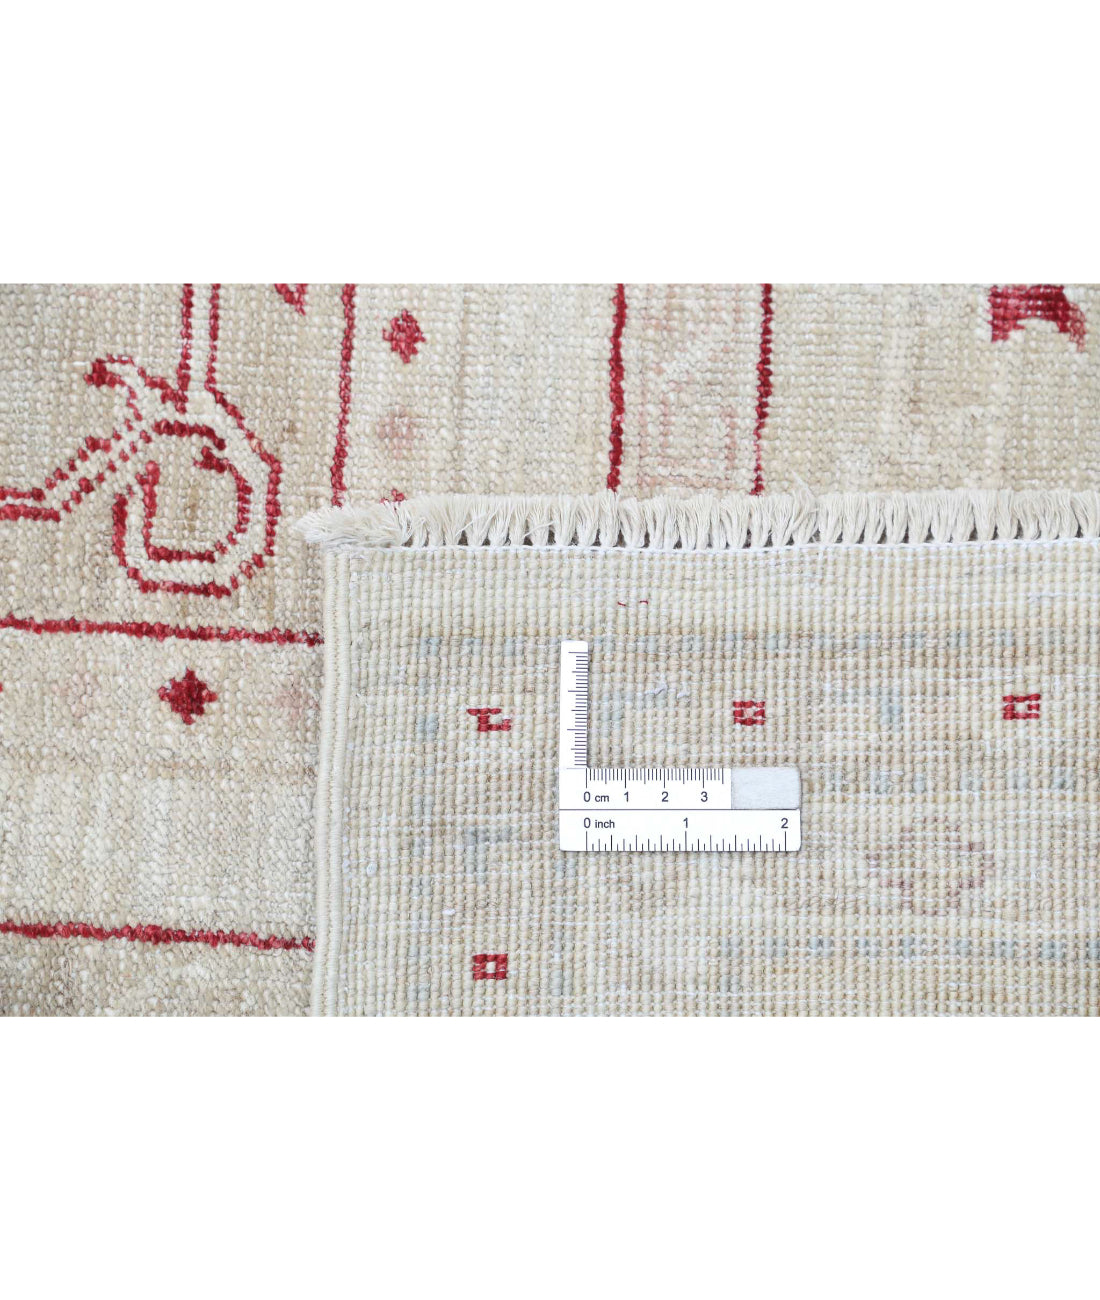 Serenity 8'0'' X 11'1'' Hand-Knotted Wool Rug 8'0'' x 11'1'' (240 X 333) / Ivory / Red